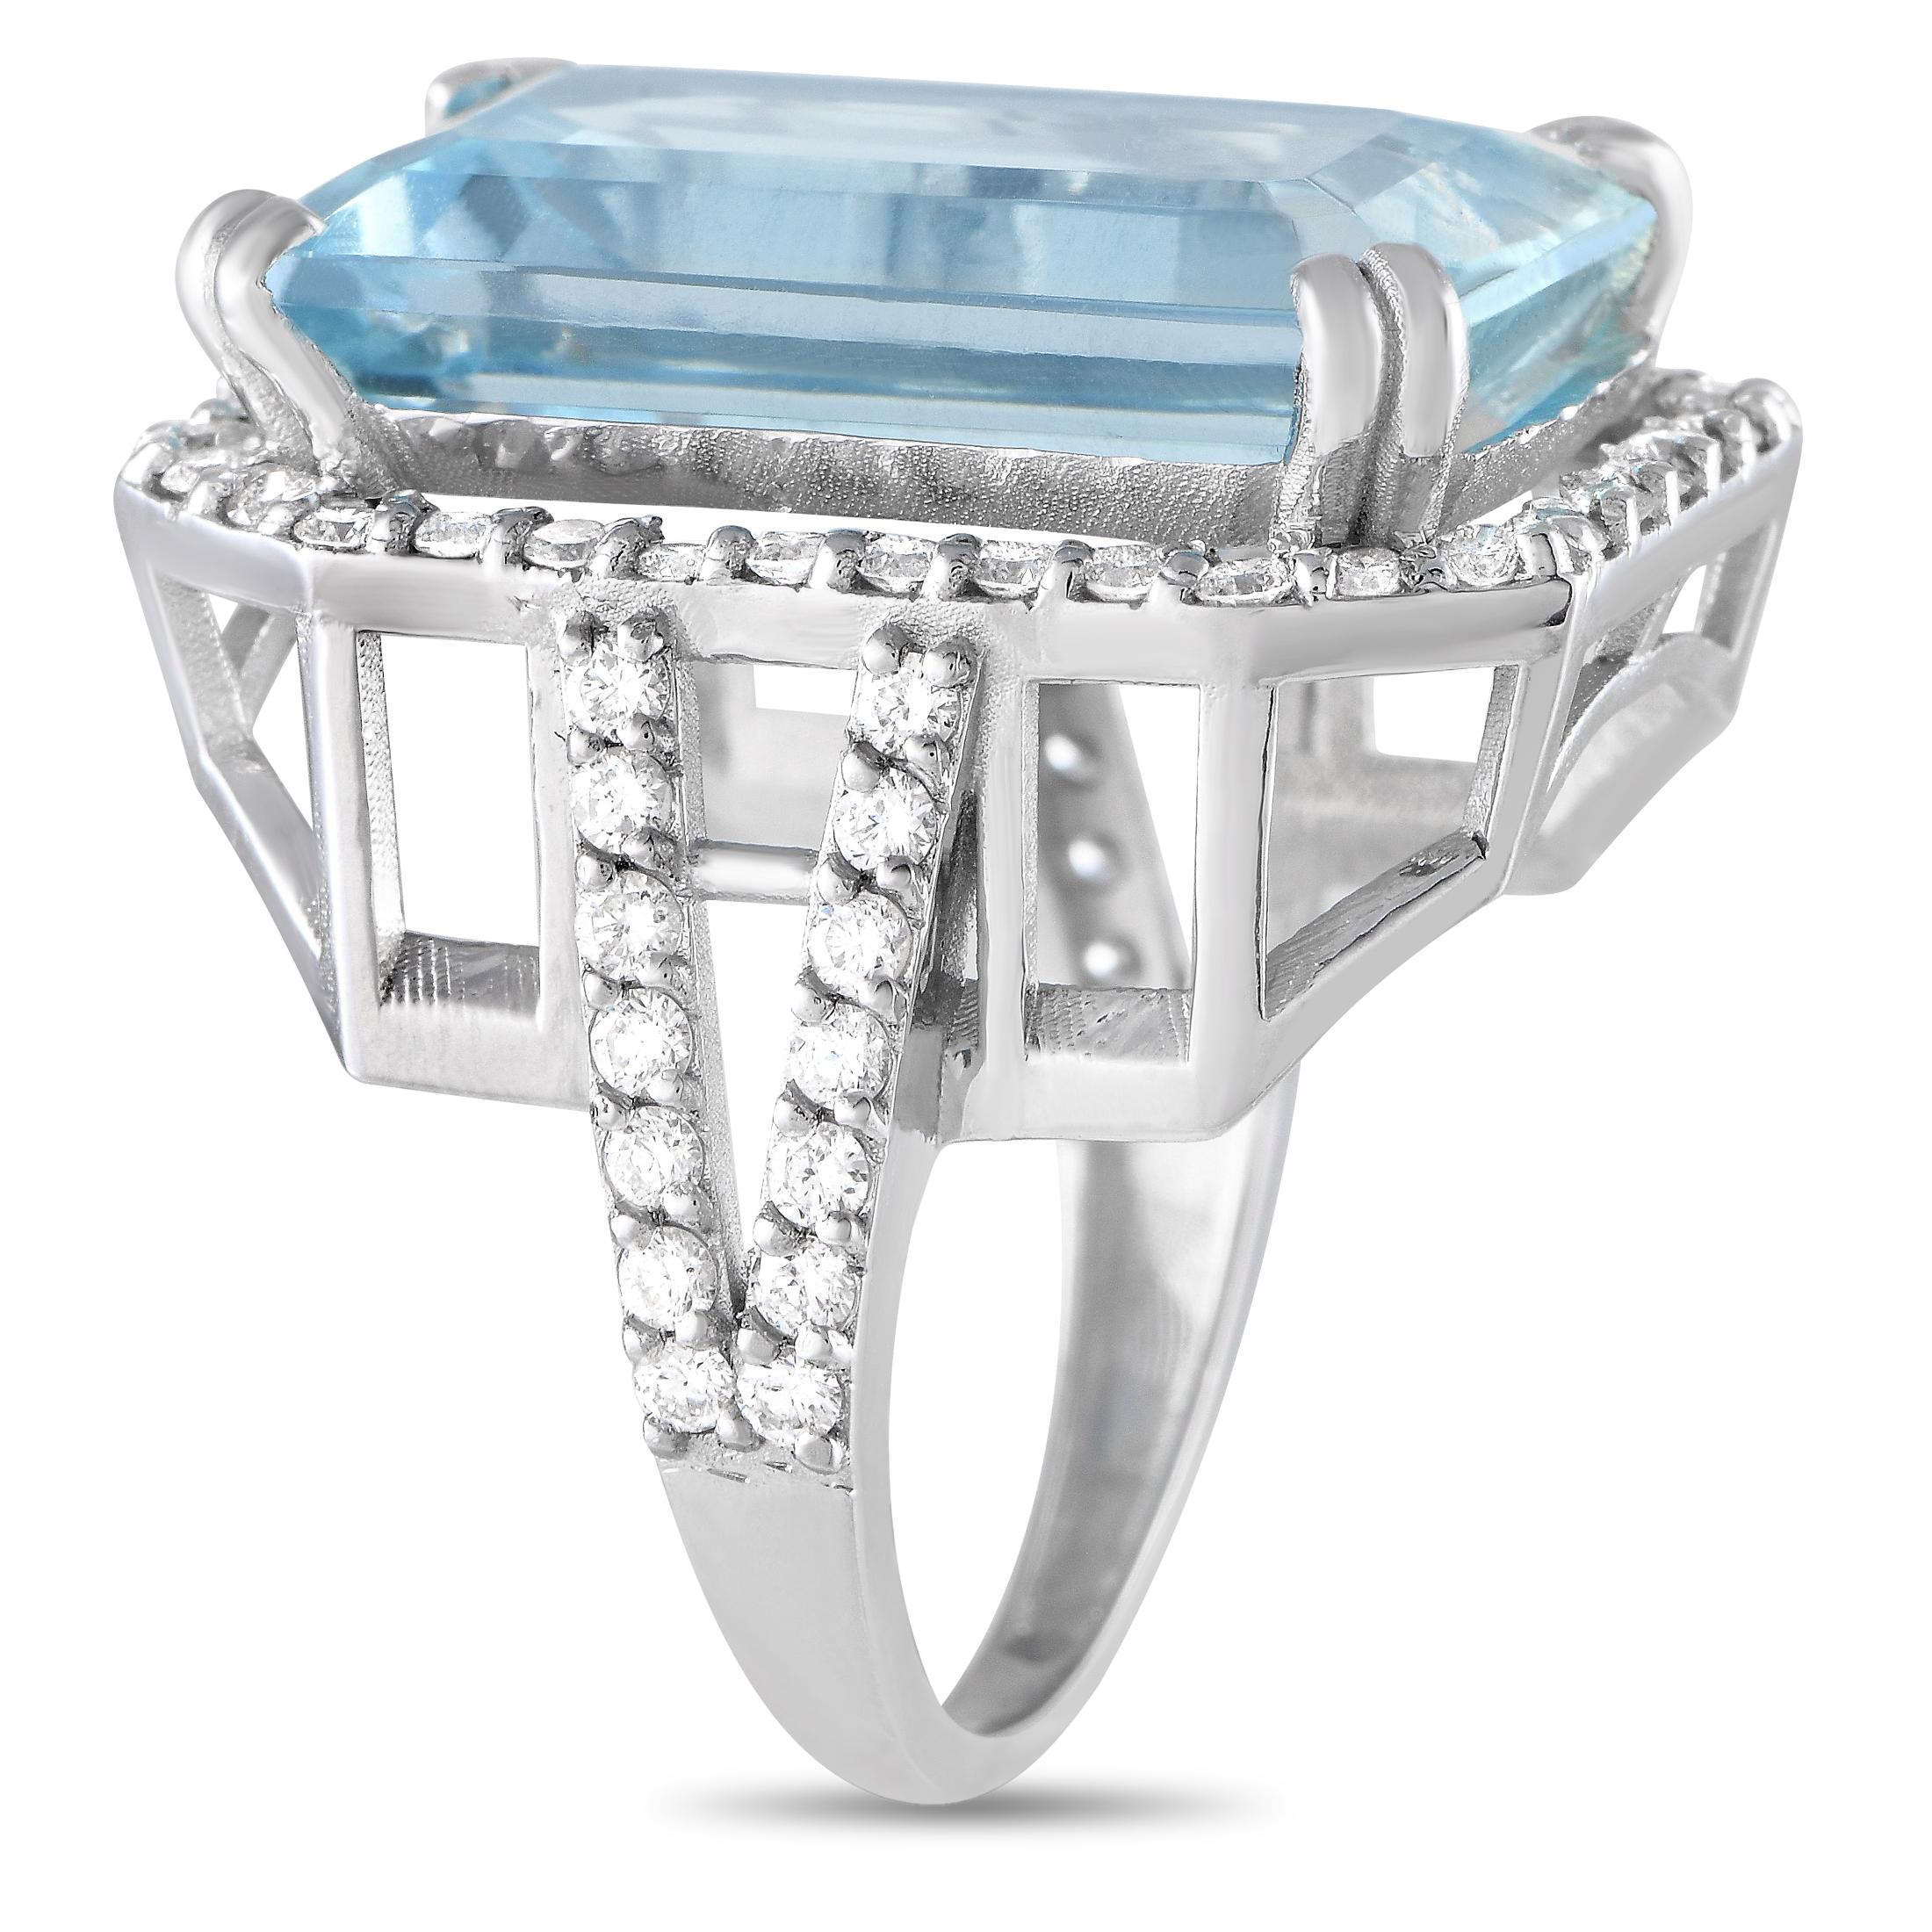 Expect to fall in love with this delicate and dramatic diamond and aquamarine ring. It features a glittering split shank in everlasting platinum, anchoring an oversized centerpiece set with a stunning 14.06-ct aquamarine framed by round diamonds.